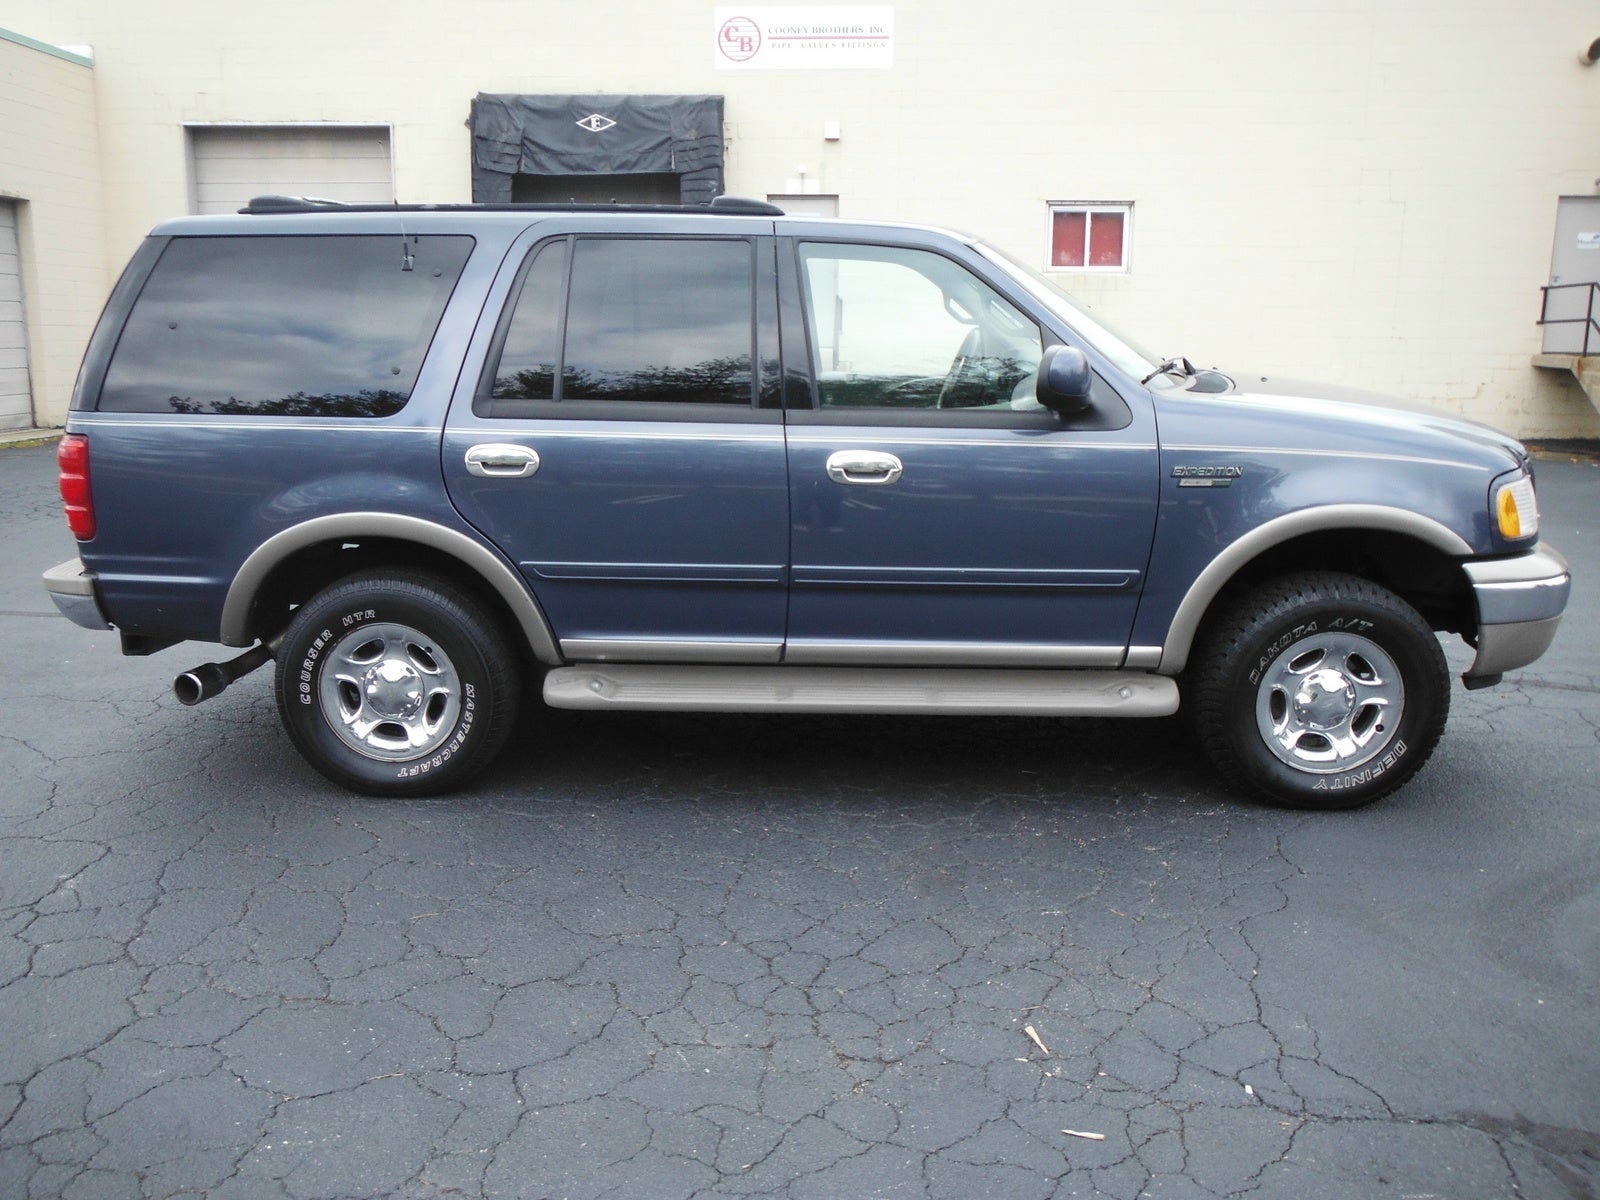 2001 Ford expedition blue book value #3